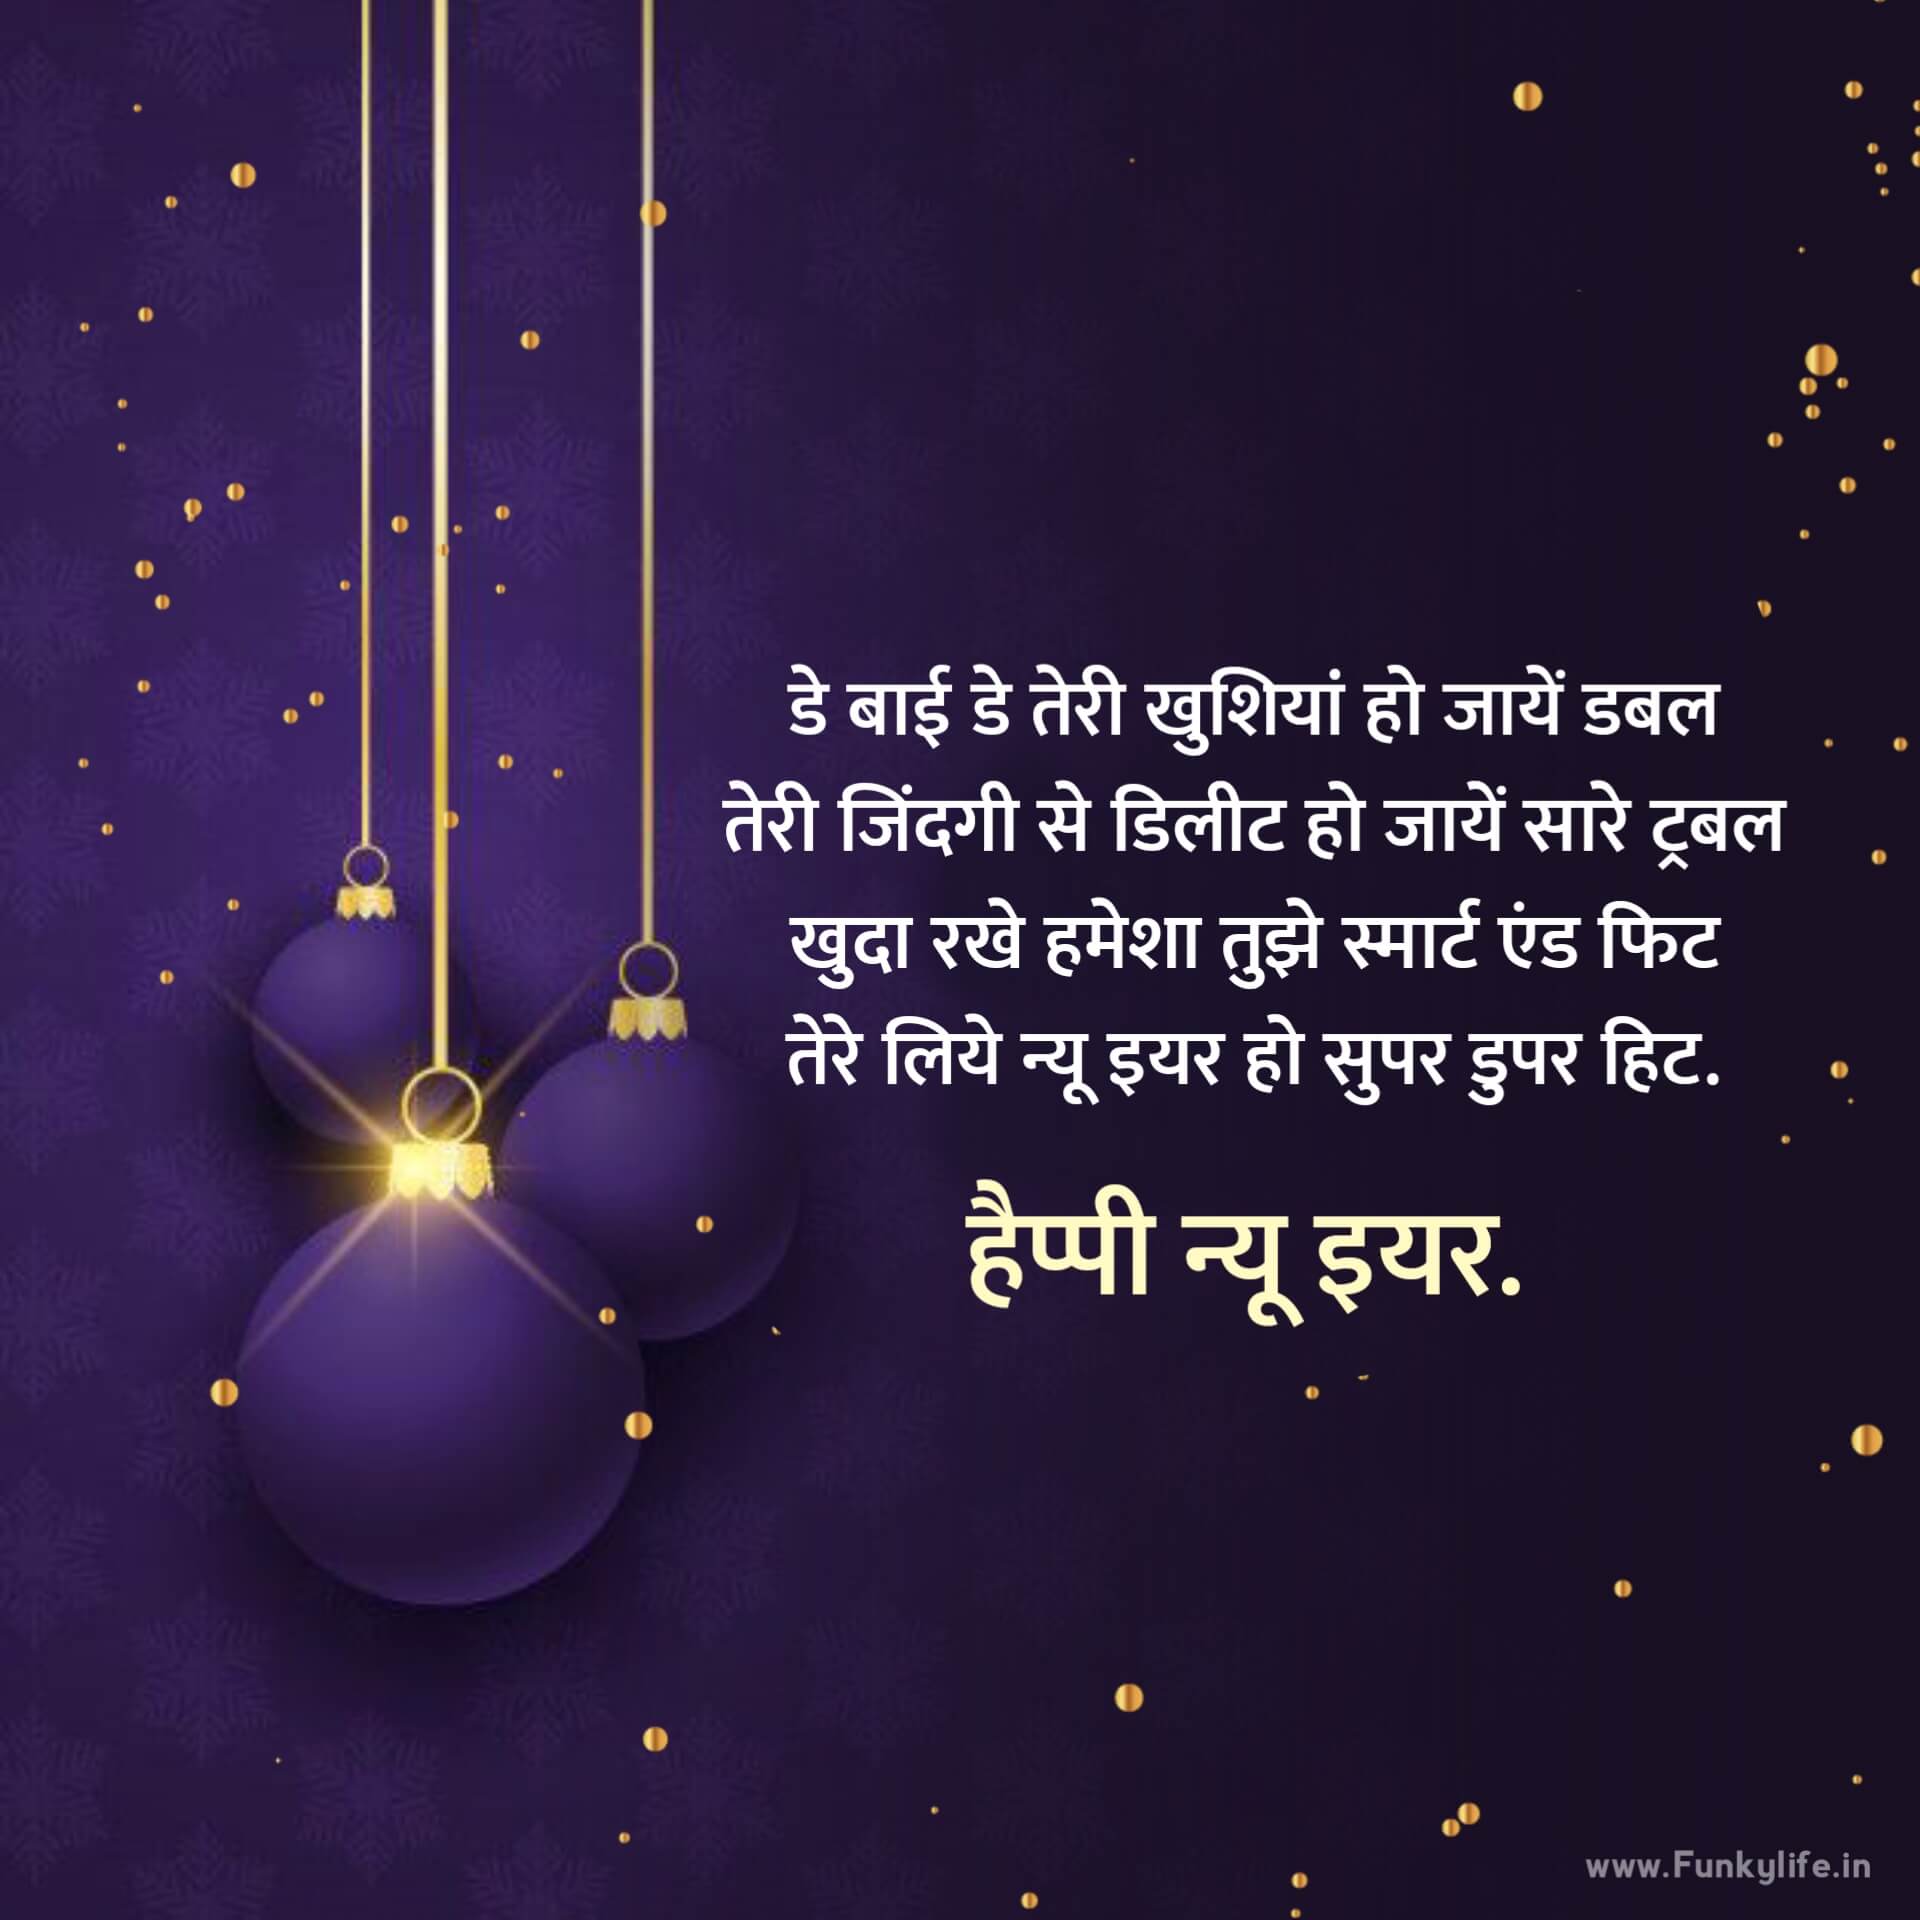 Happy New Year Wishes Messages in Hindi